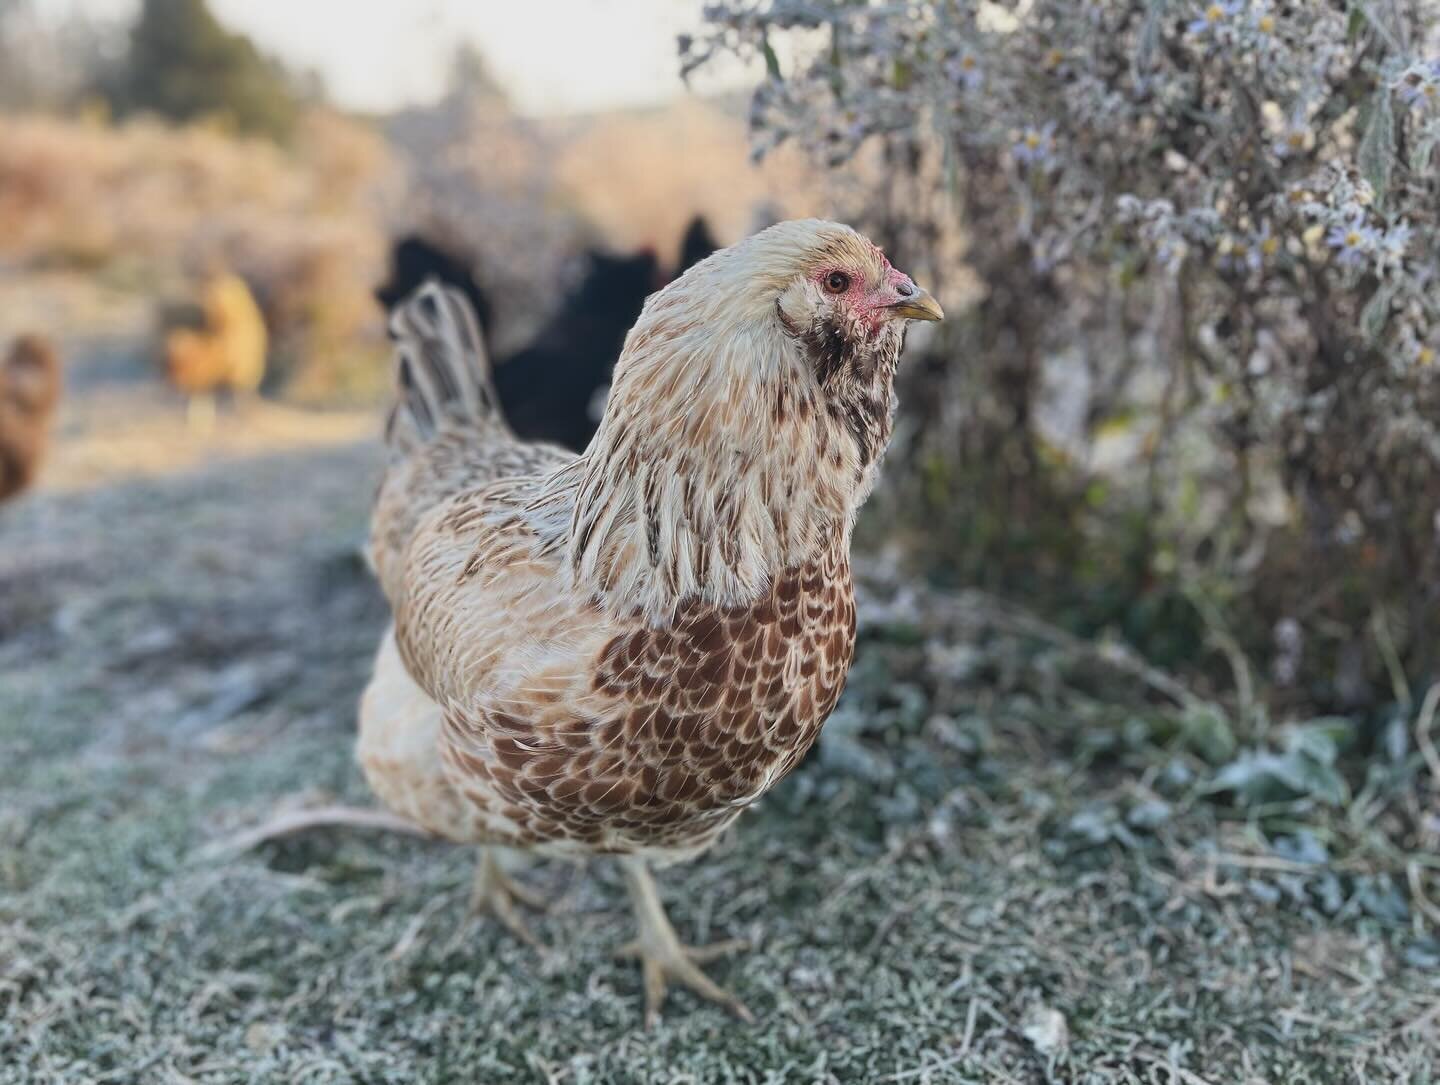 Brisk morning with the chickens ❄️🐓 (some are still molting and look a little wild) #backyardchickens